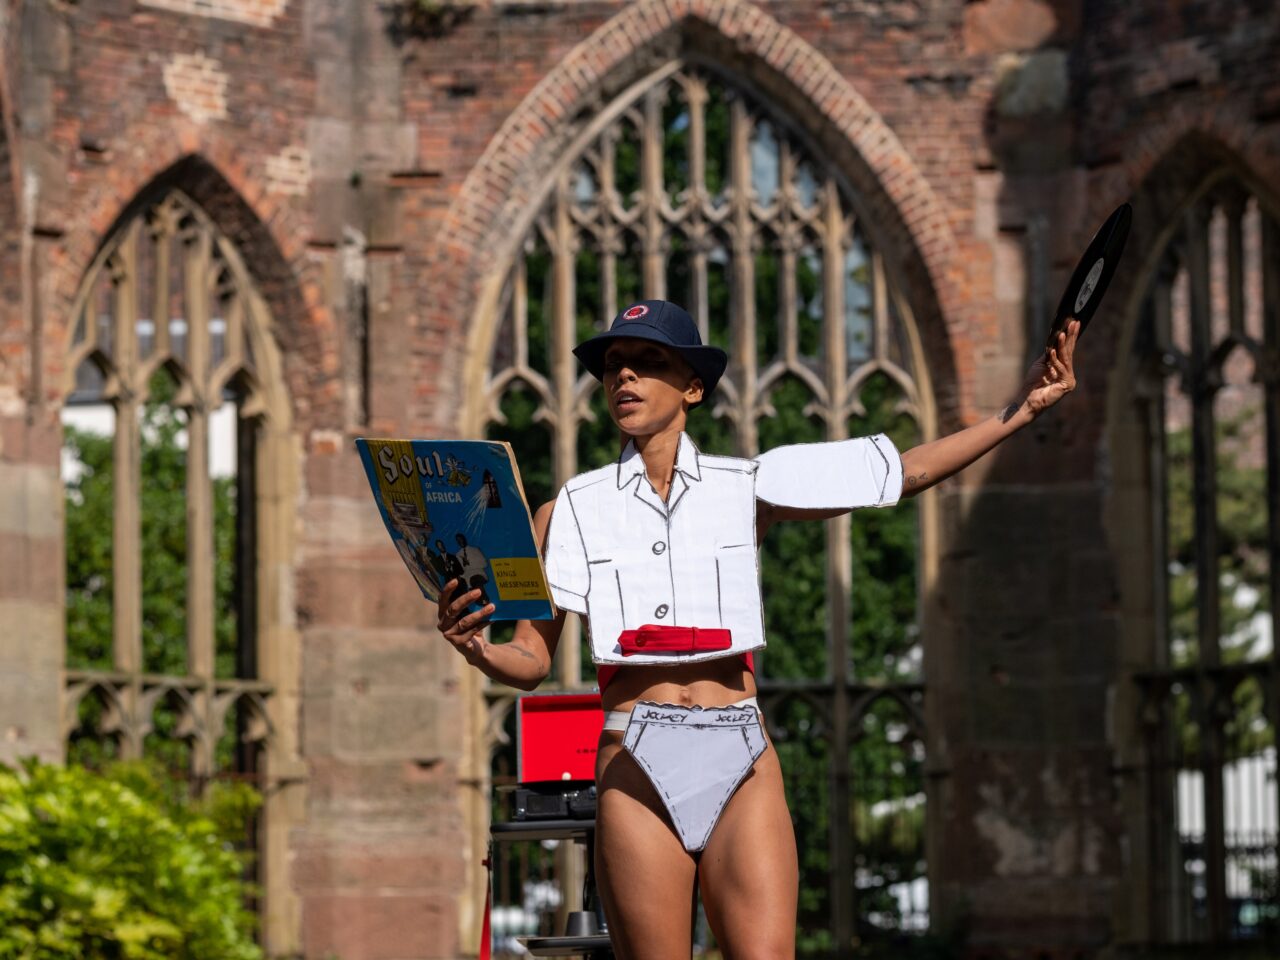 The artist presenting a live work in Liverpool's Bombed Out Church. They are wearing cardboard cutouts of a white school uniform and a hat. They are on a stage talking and with one hand holding a vinyl and the other holding the blue cover.